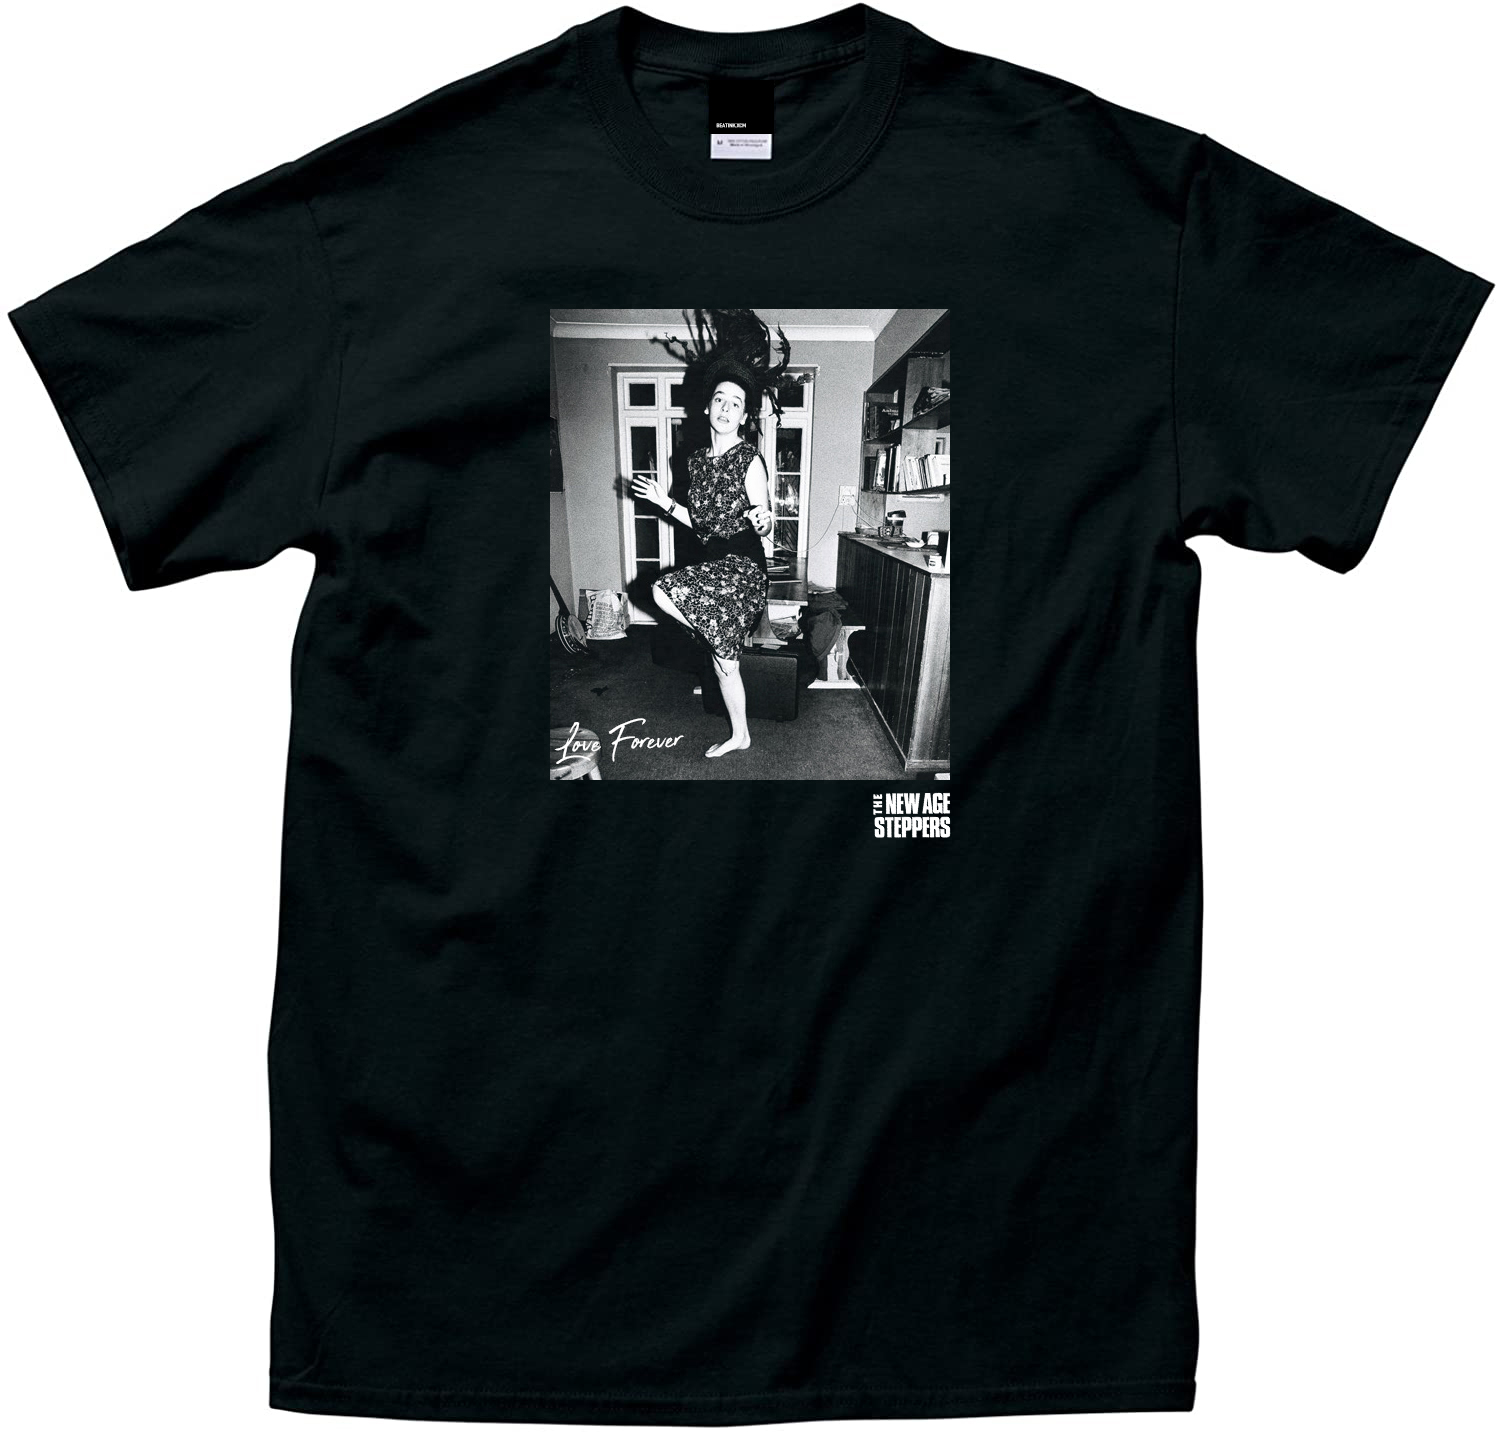 NEW AGE STEPPERS T-Shirt